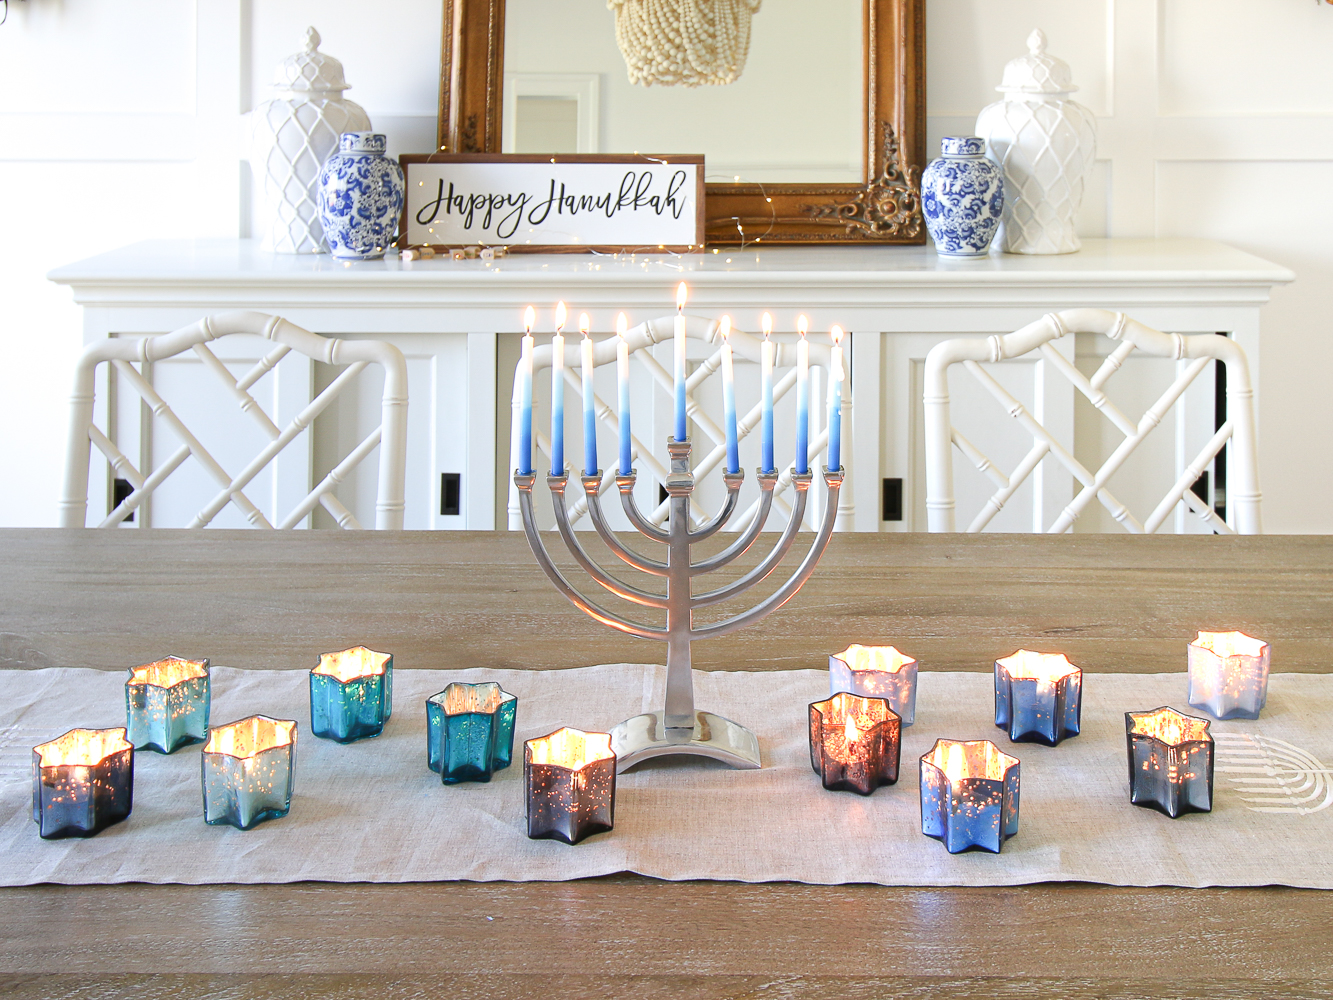 Hanukkah Decorations So You Can Go All Out This Holiday – Kveller